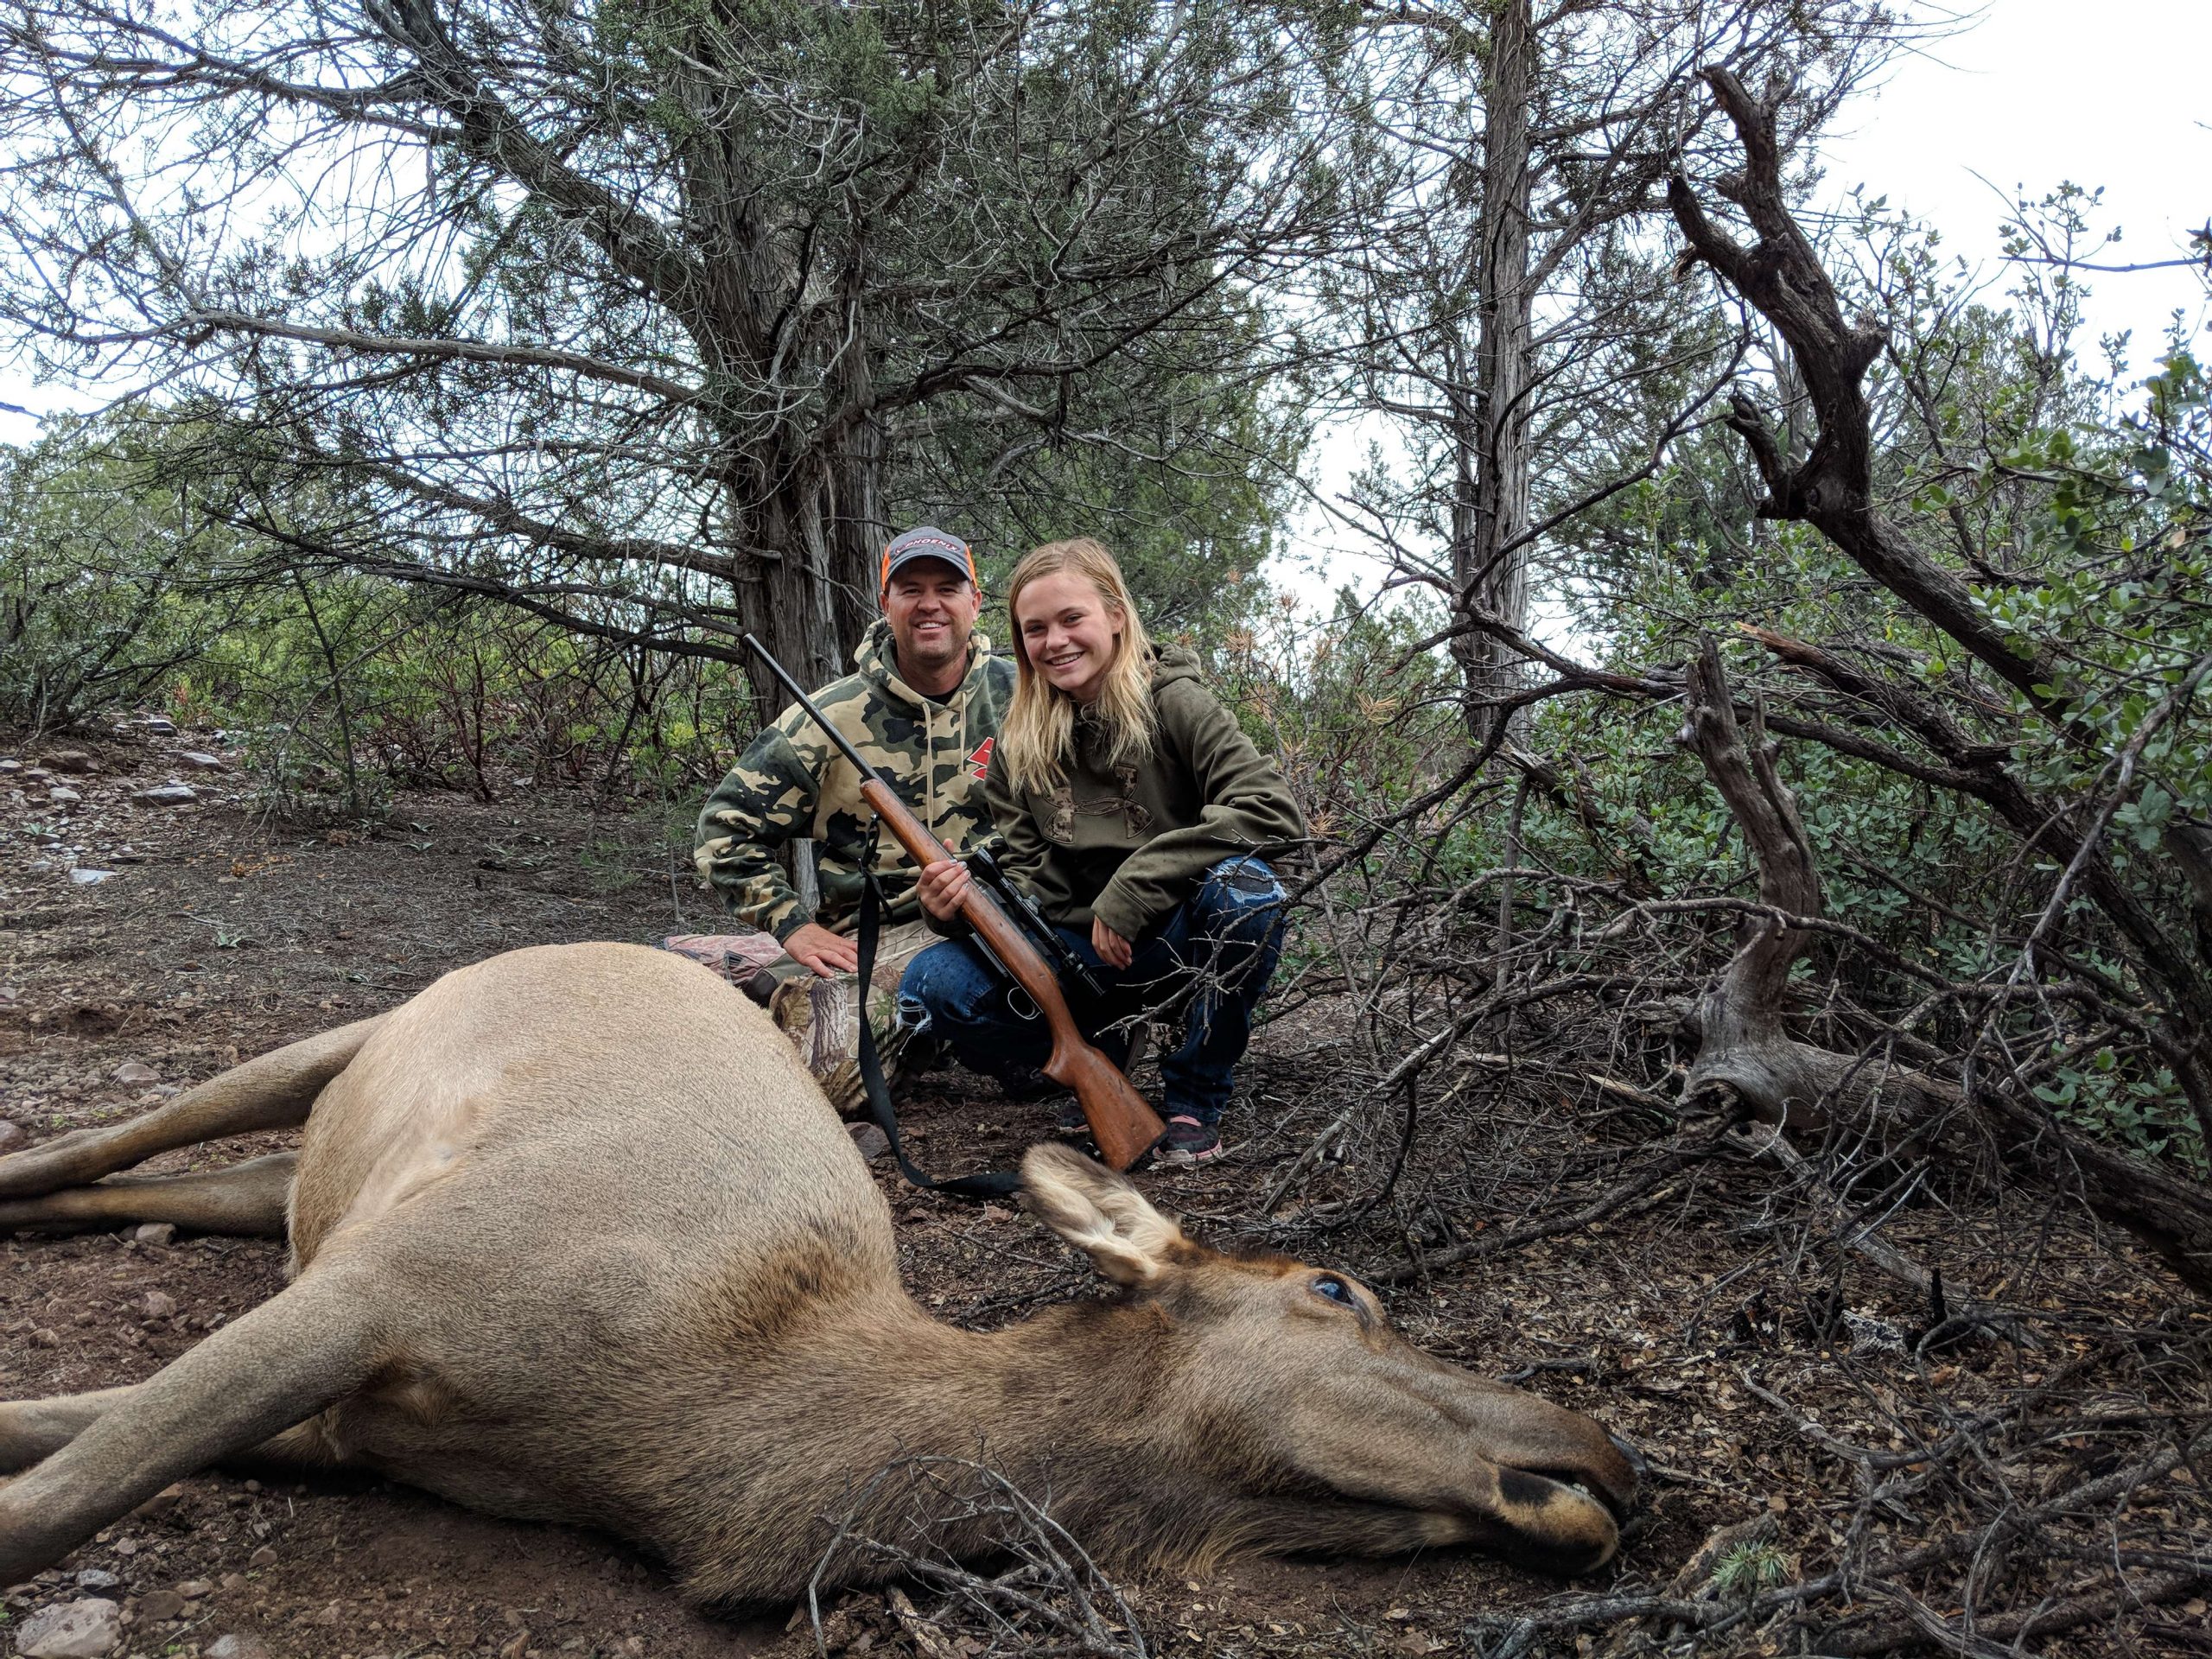 <p><b>1. Pirch girls take their first elk</b></p>
<p>Just like Clifford did with Dennis a few decades before, Kailee and Kassidy Pirch started hunting with their father at a young age. Arizona offers youth hunts when a person turns 10 years old and takes a hunter safety course, and both girls went with their dad hunting cow elk soon after they met those requirements. Kassidy, the younger daughter, bagged her first elk three years ago and Kailee killed her first cow a year later. Kassidy seems to enjoy the sport more than her older sister, Pirch said, and she downed another cow last season. âShe filled our freezer for a year,â Pirch said proudly. âHunting with them was something we could do together.â